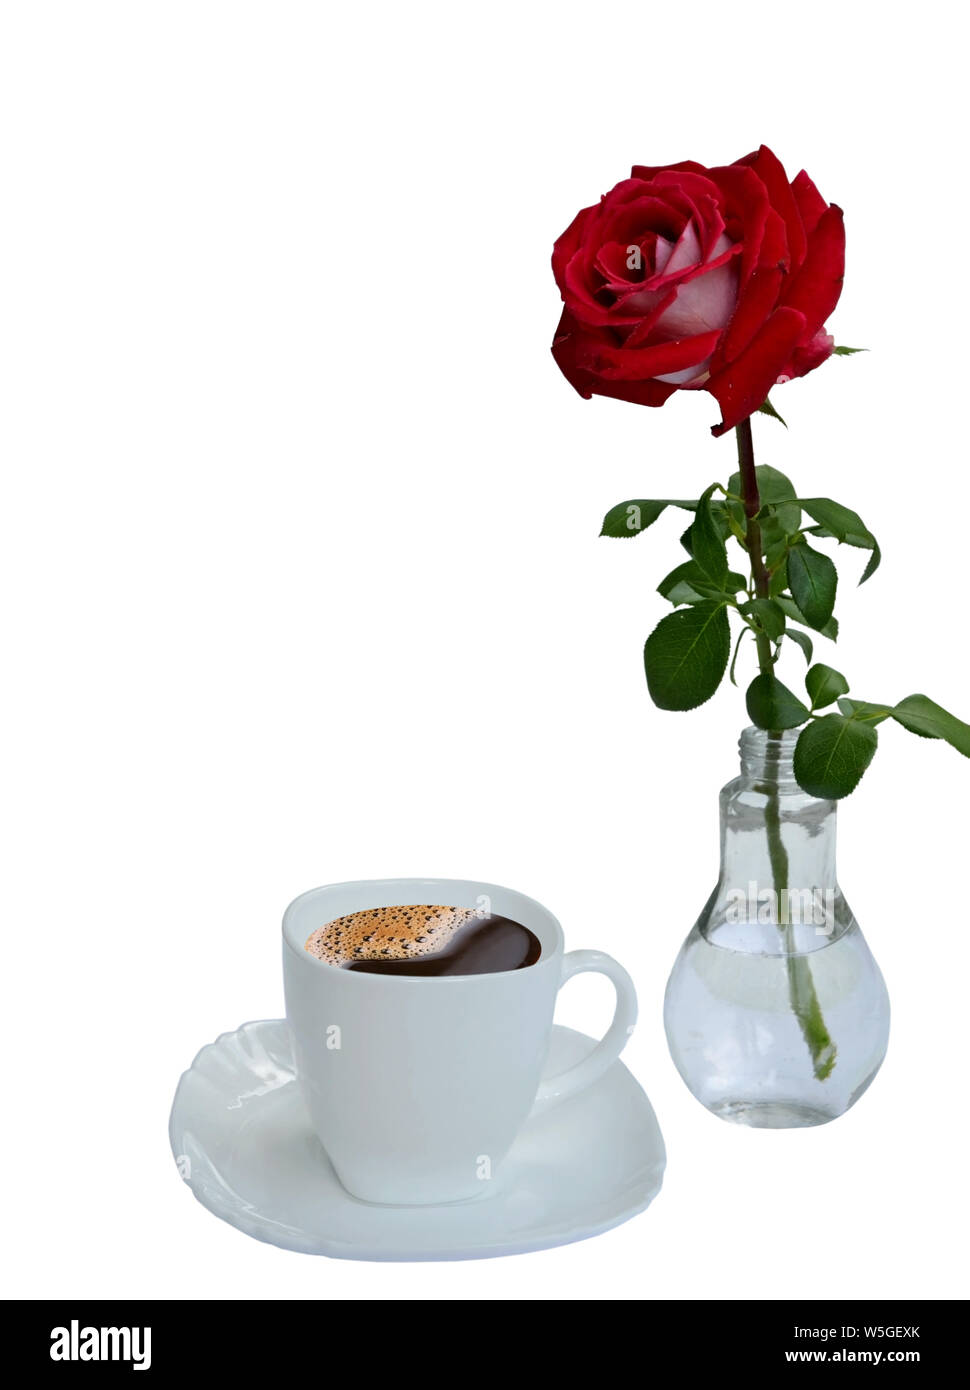 Photo of a single red rose in a vase and coffee in a white cup and saucer, isolated on a white background. Stock Photo